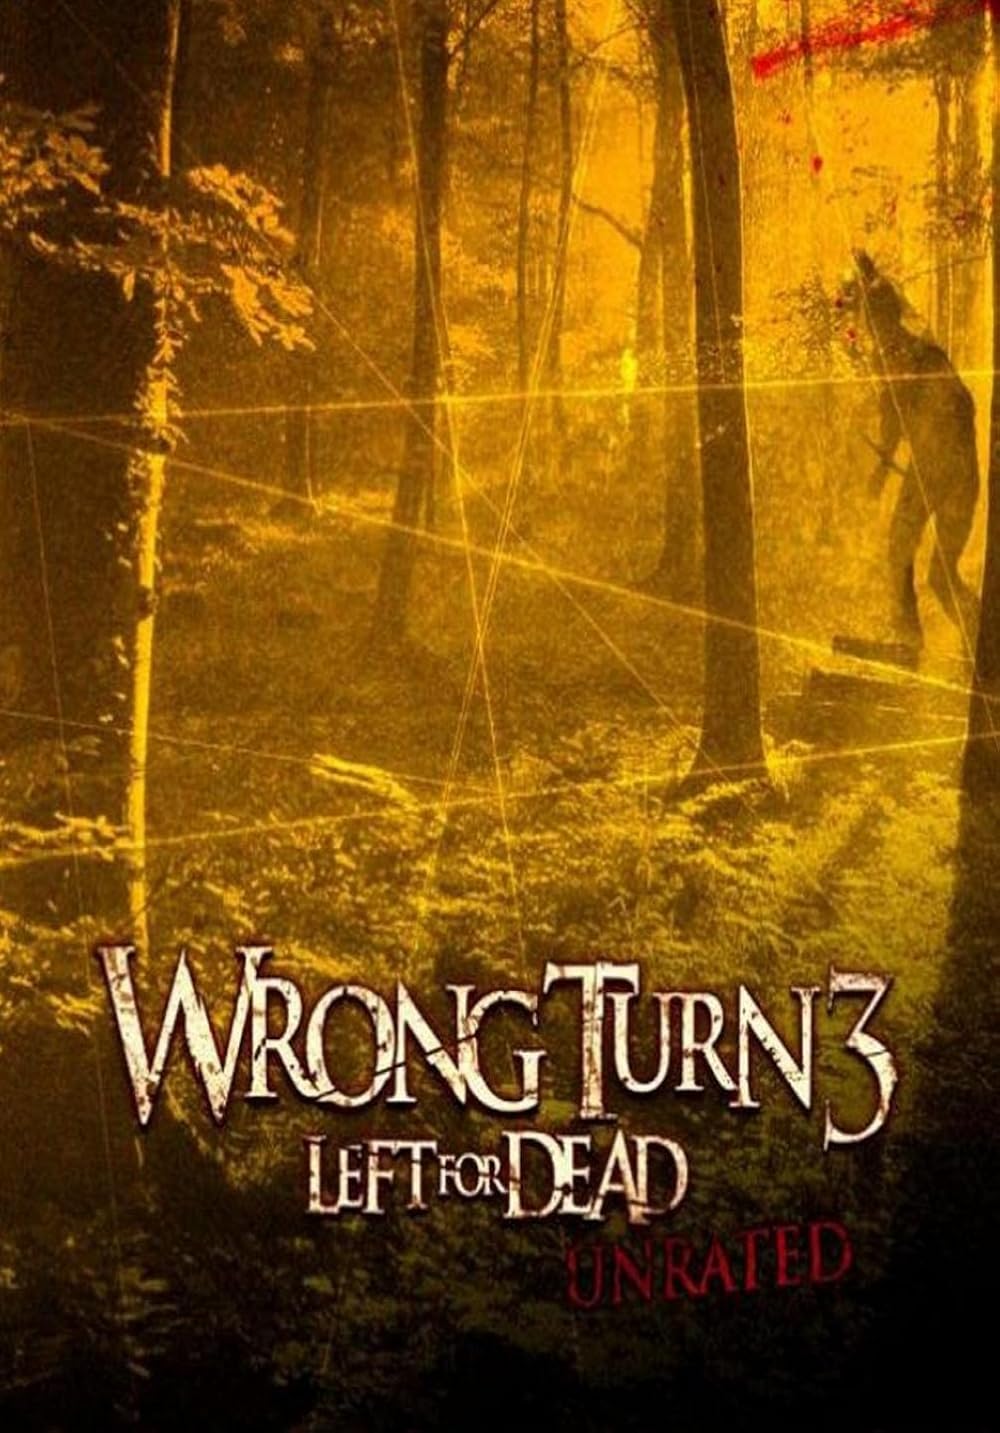 Wrong Turn 3 Left for Dead (2009) Unrated Cut 128Kbps 23.976Fps 48Khz 2.0Ch NF DD+ E-AC3 Turkish Audio TAC